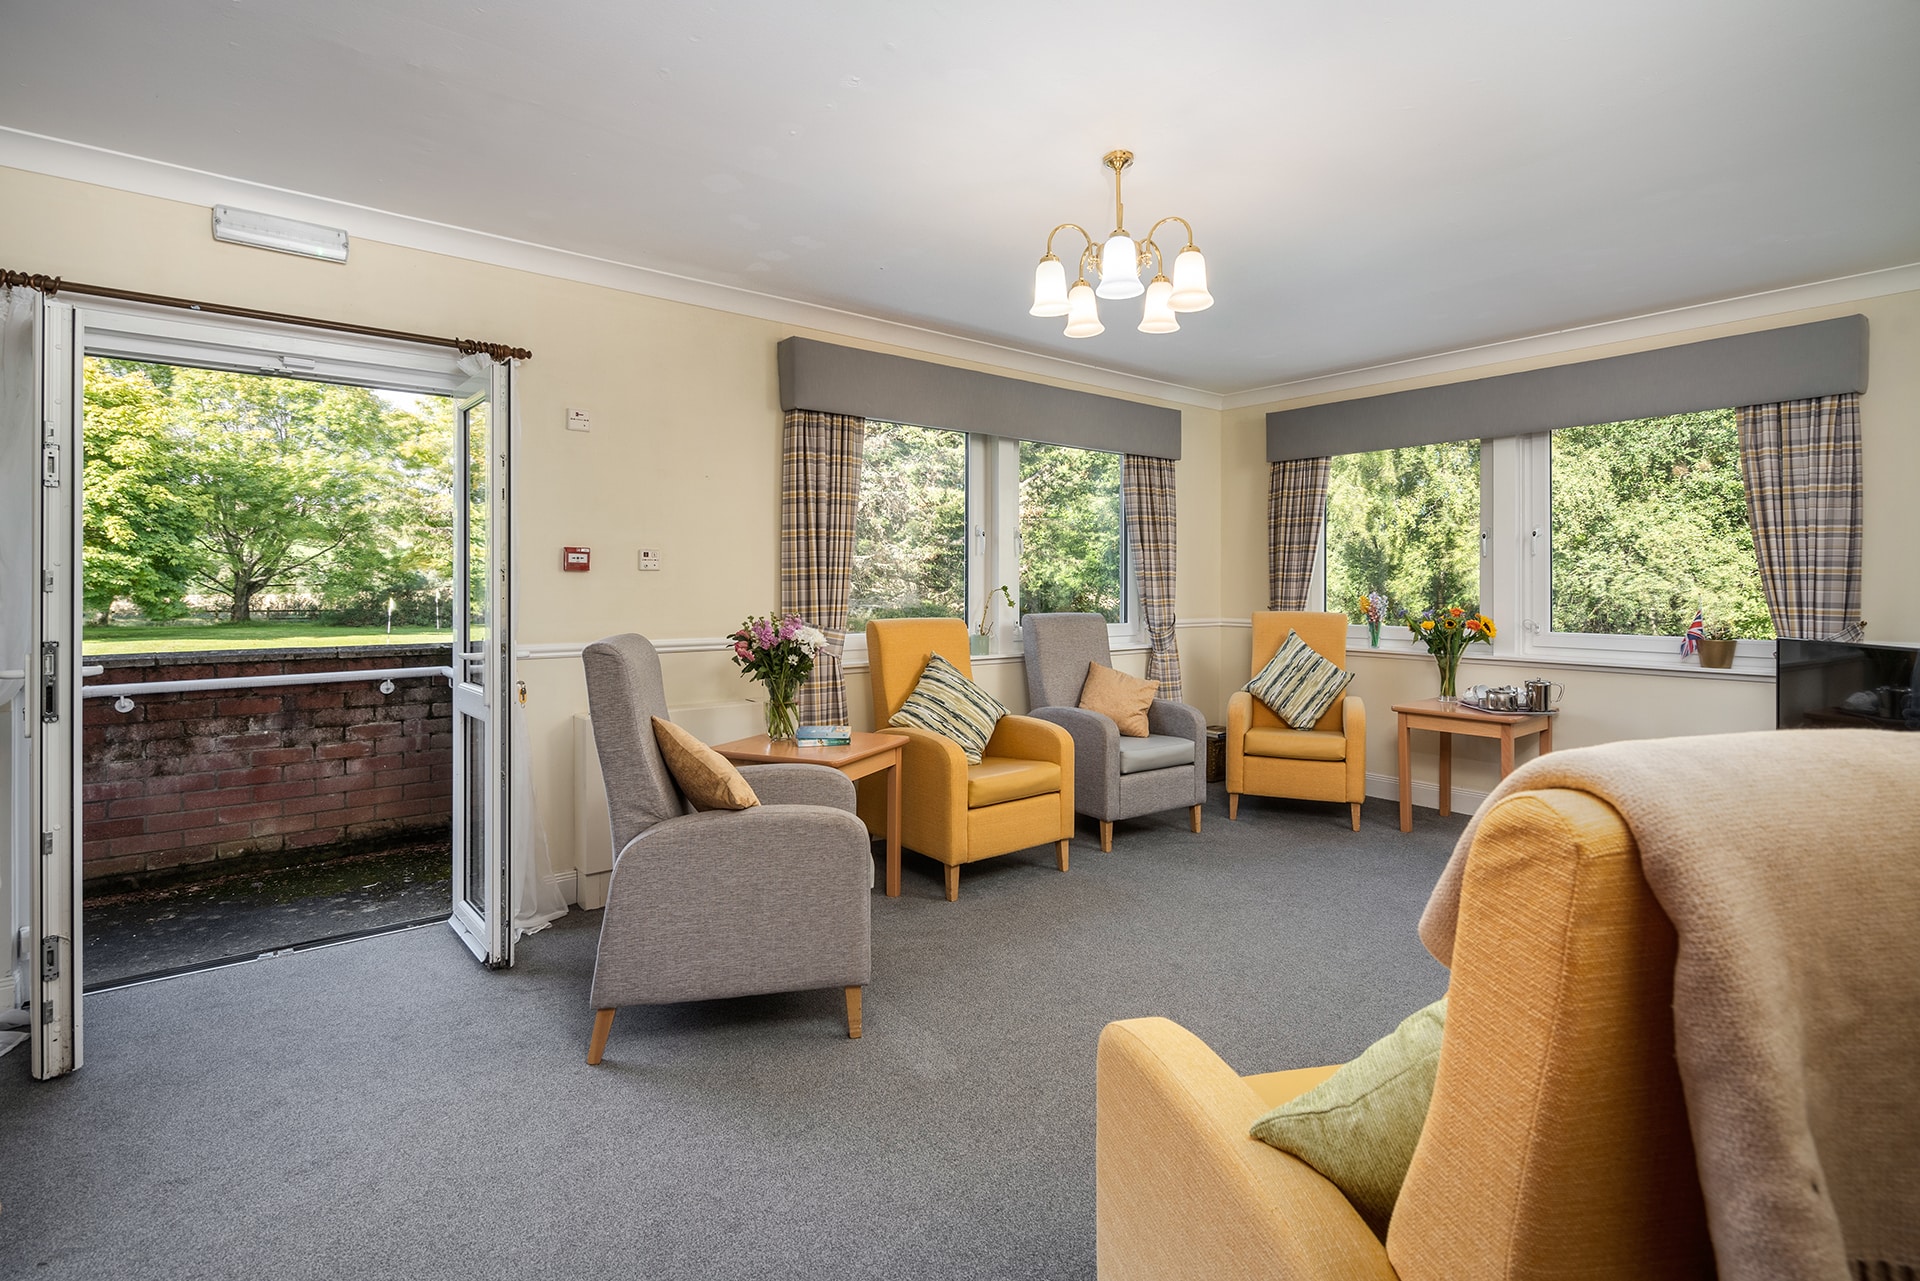 A bright and spacious ground floor lounge at Muirton House Care Home with views across the home's putting green.